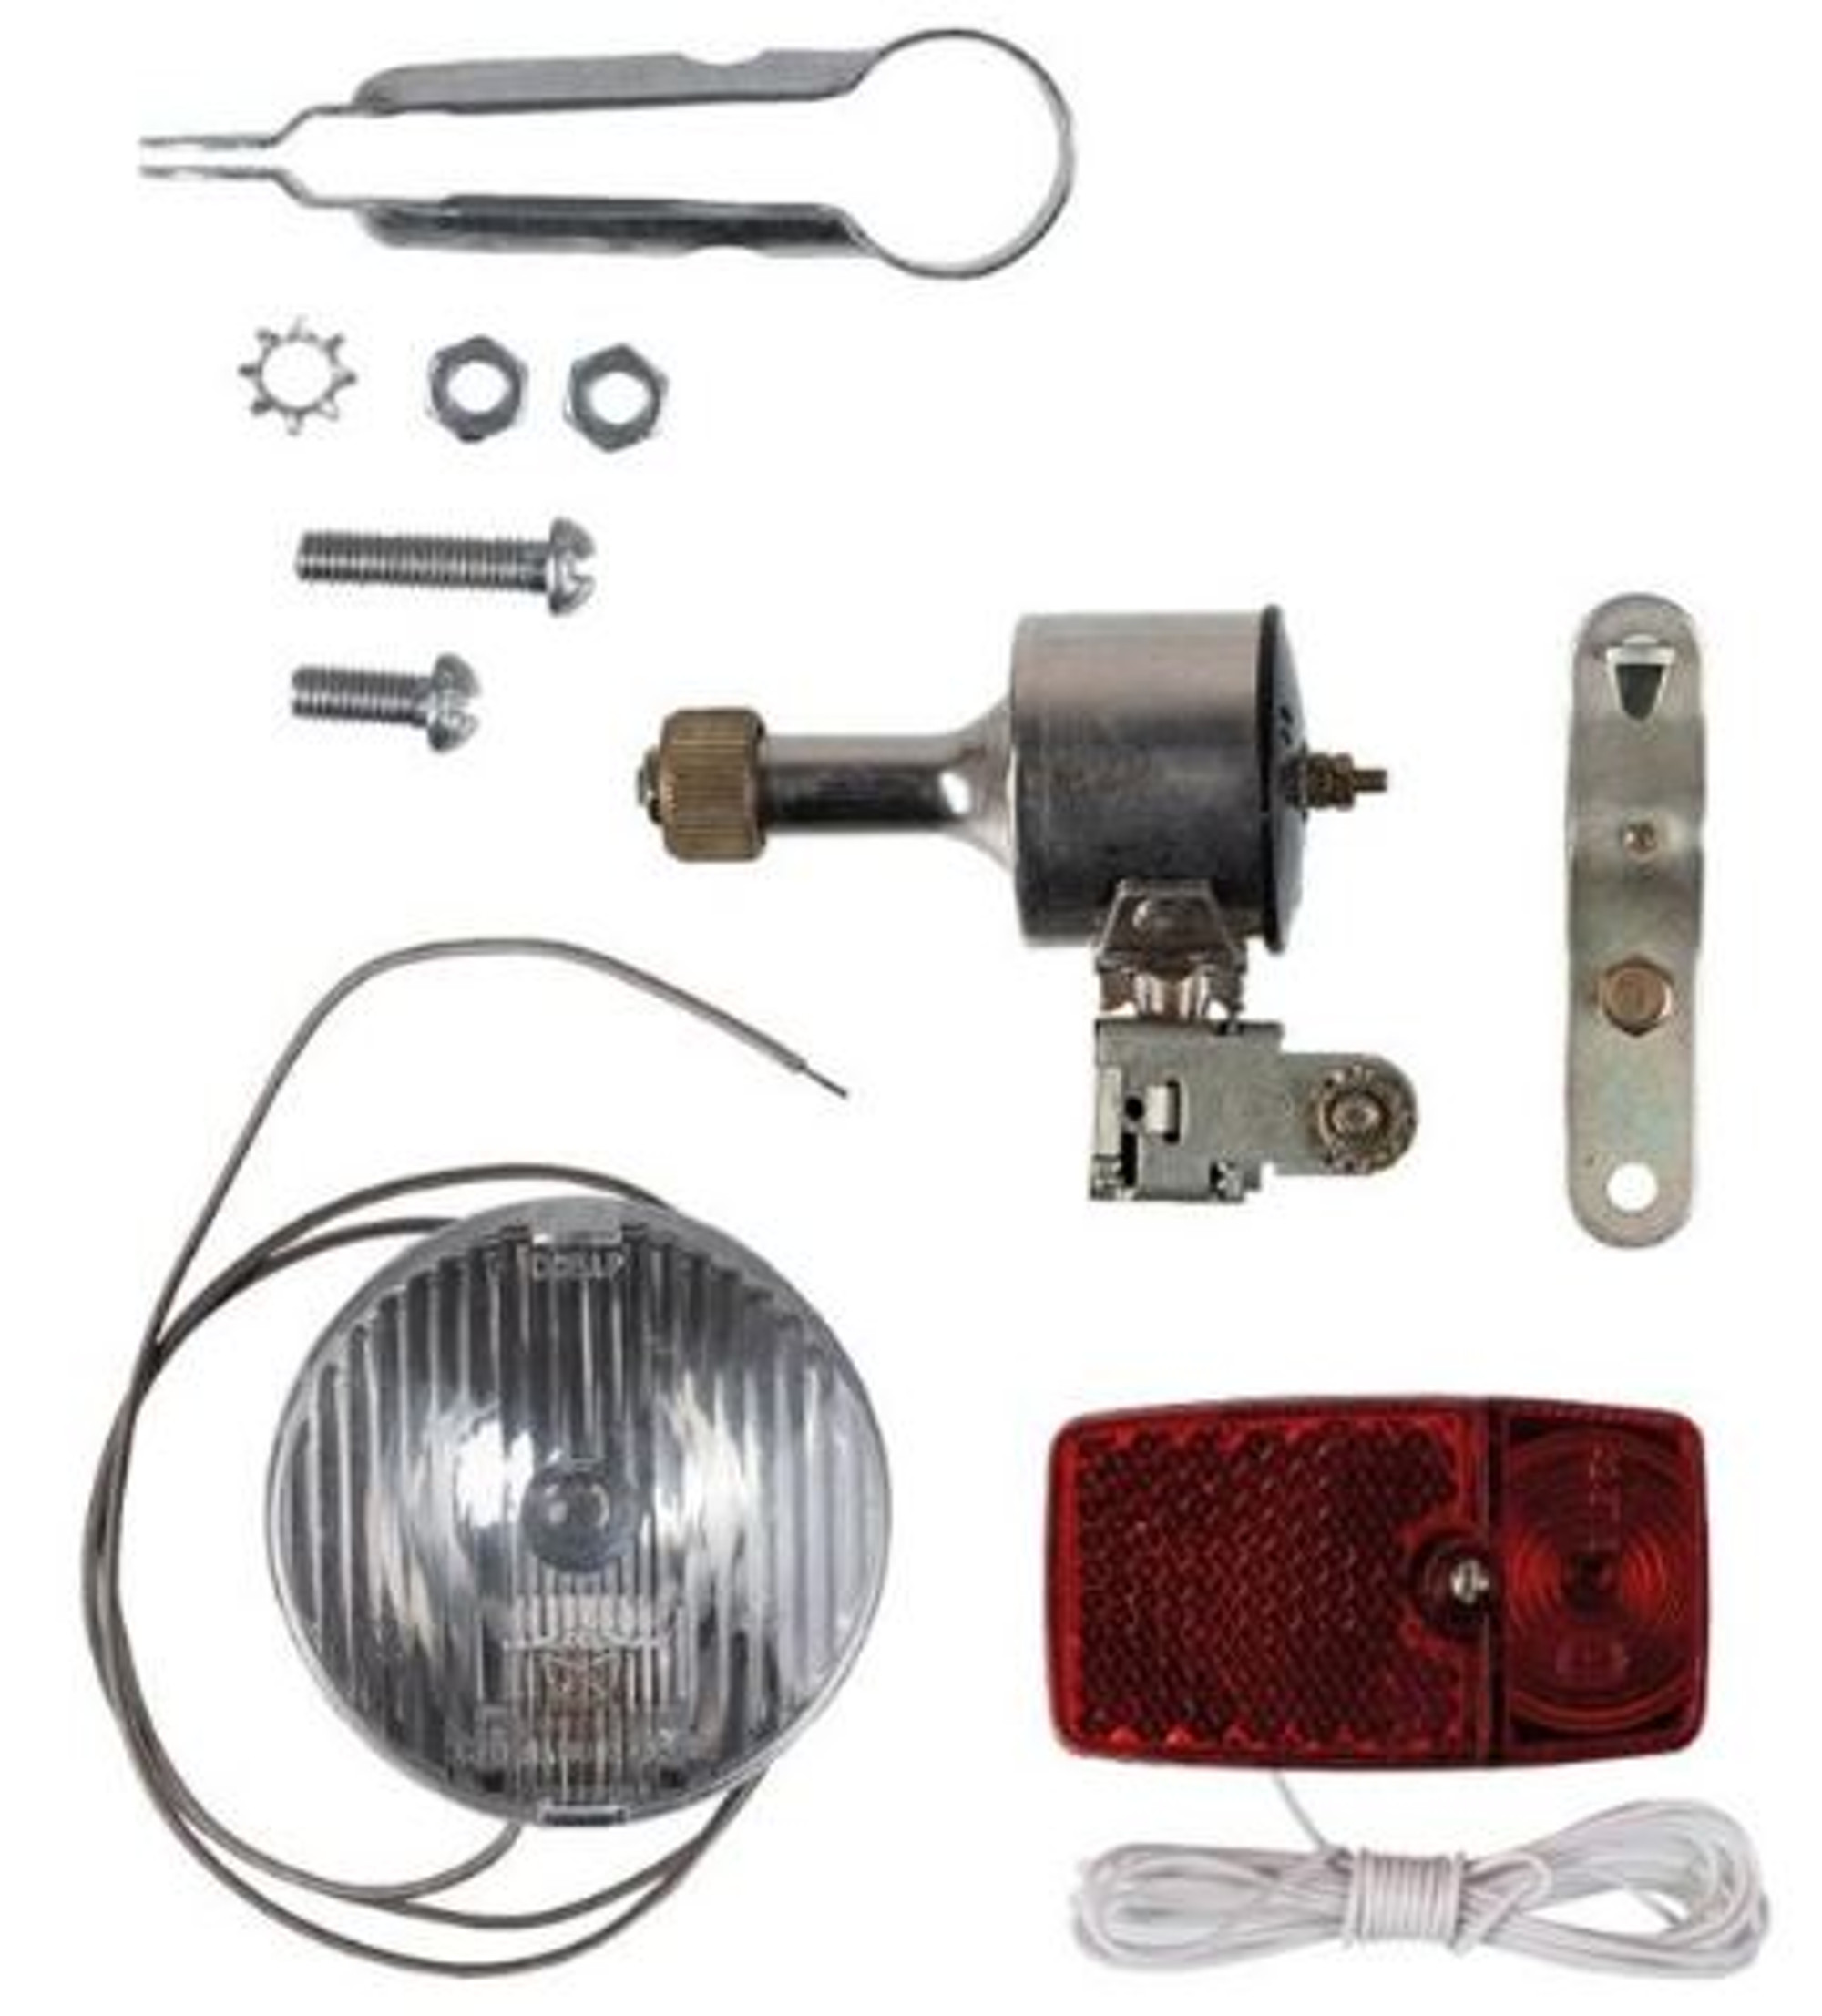 Russian Bicycle Light Set